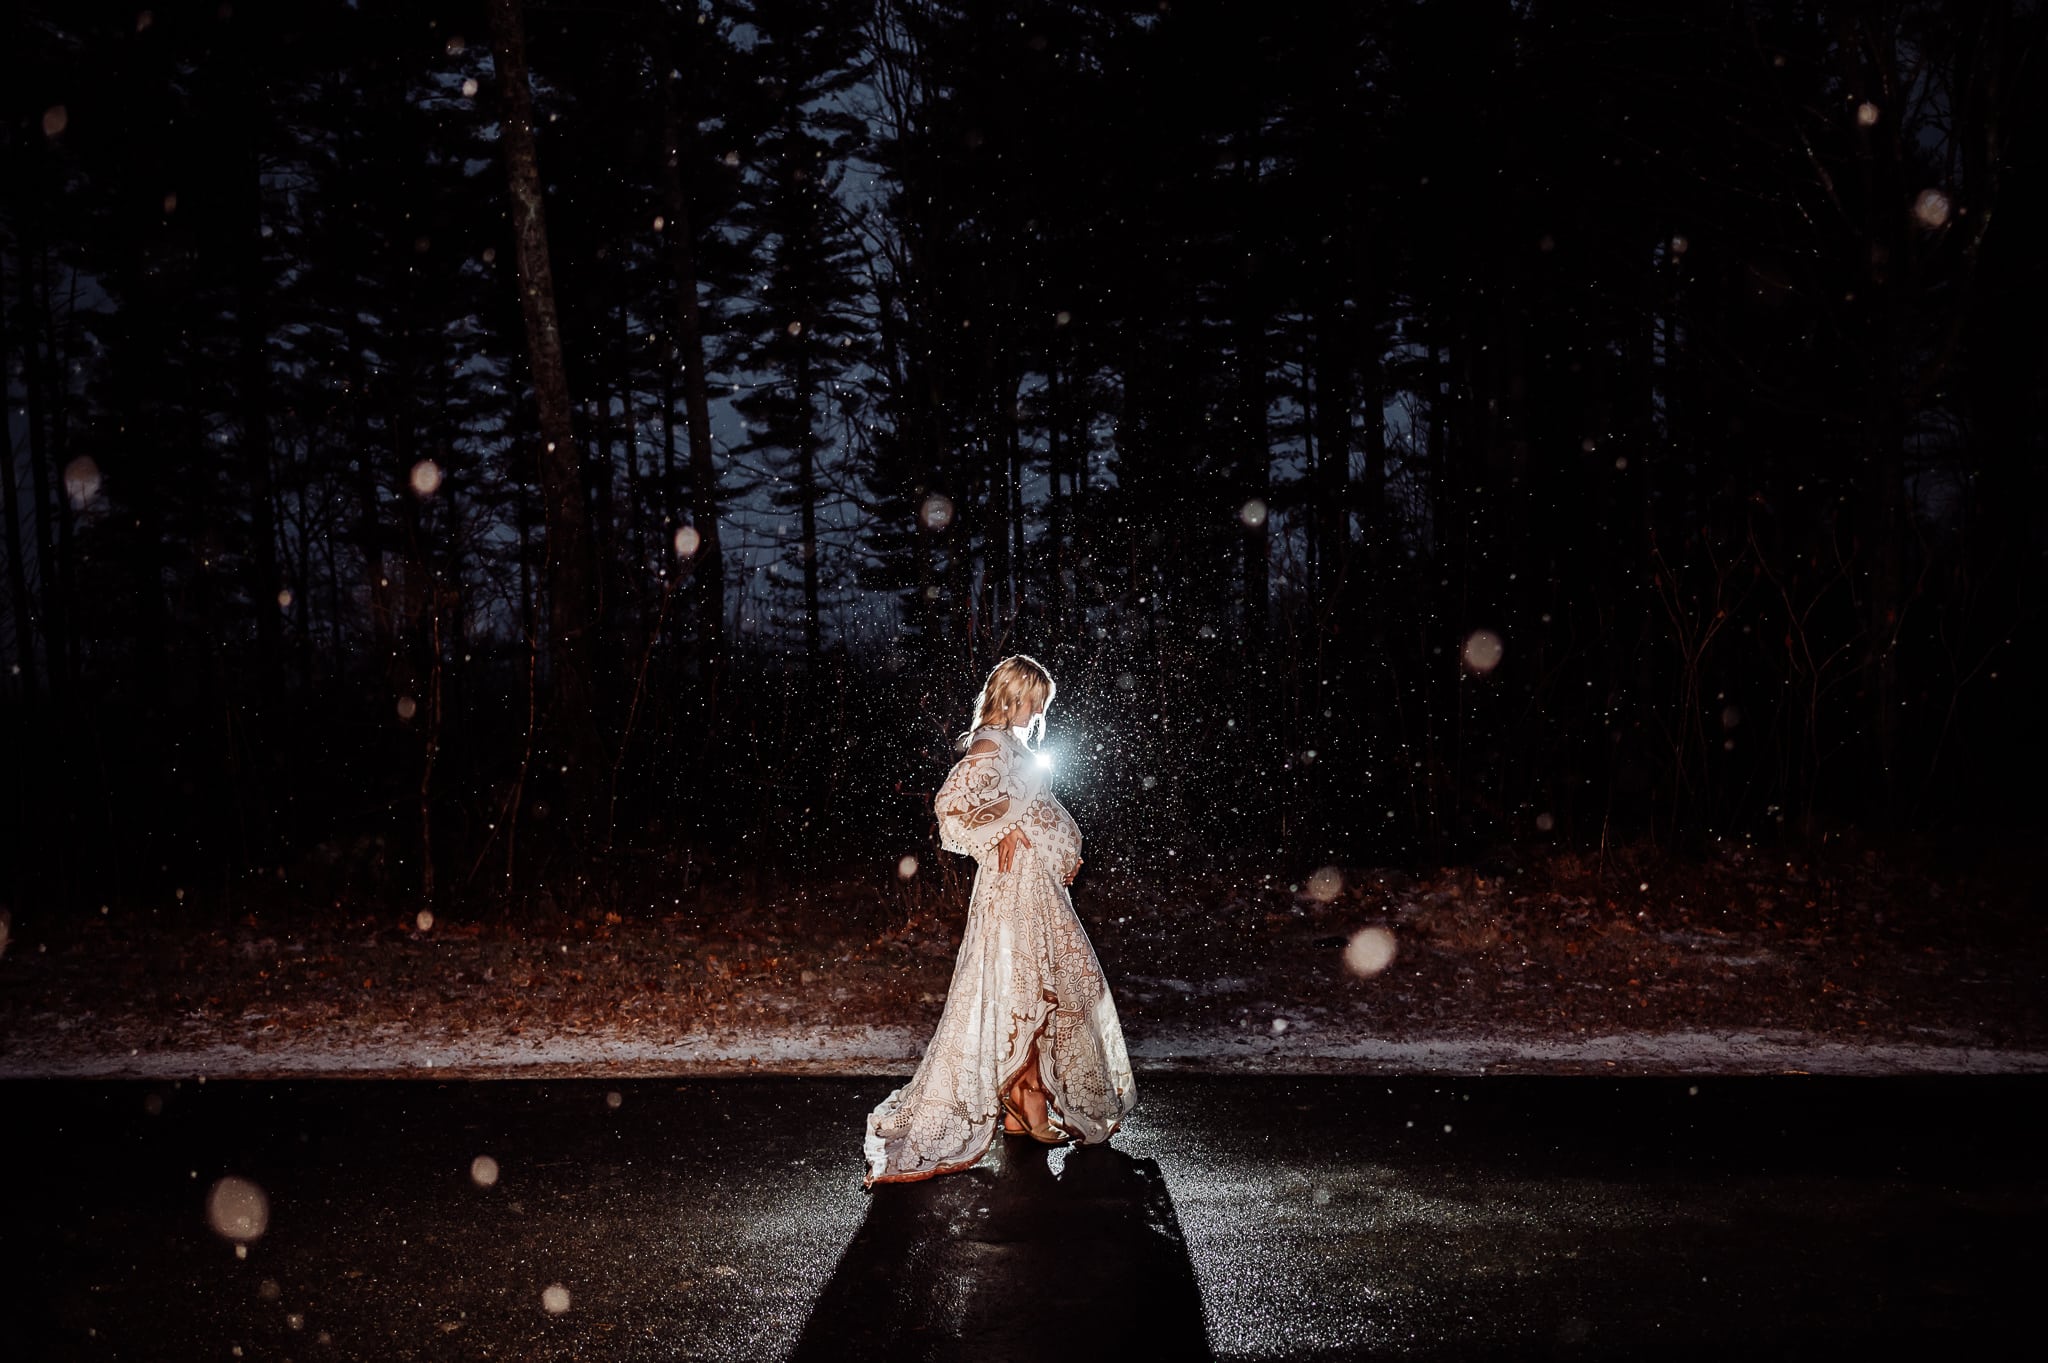 Woman wearing white dress in maternity at night in the snow